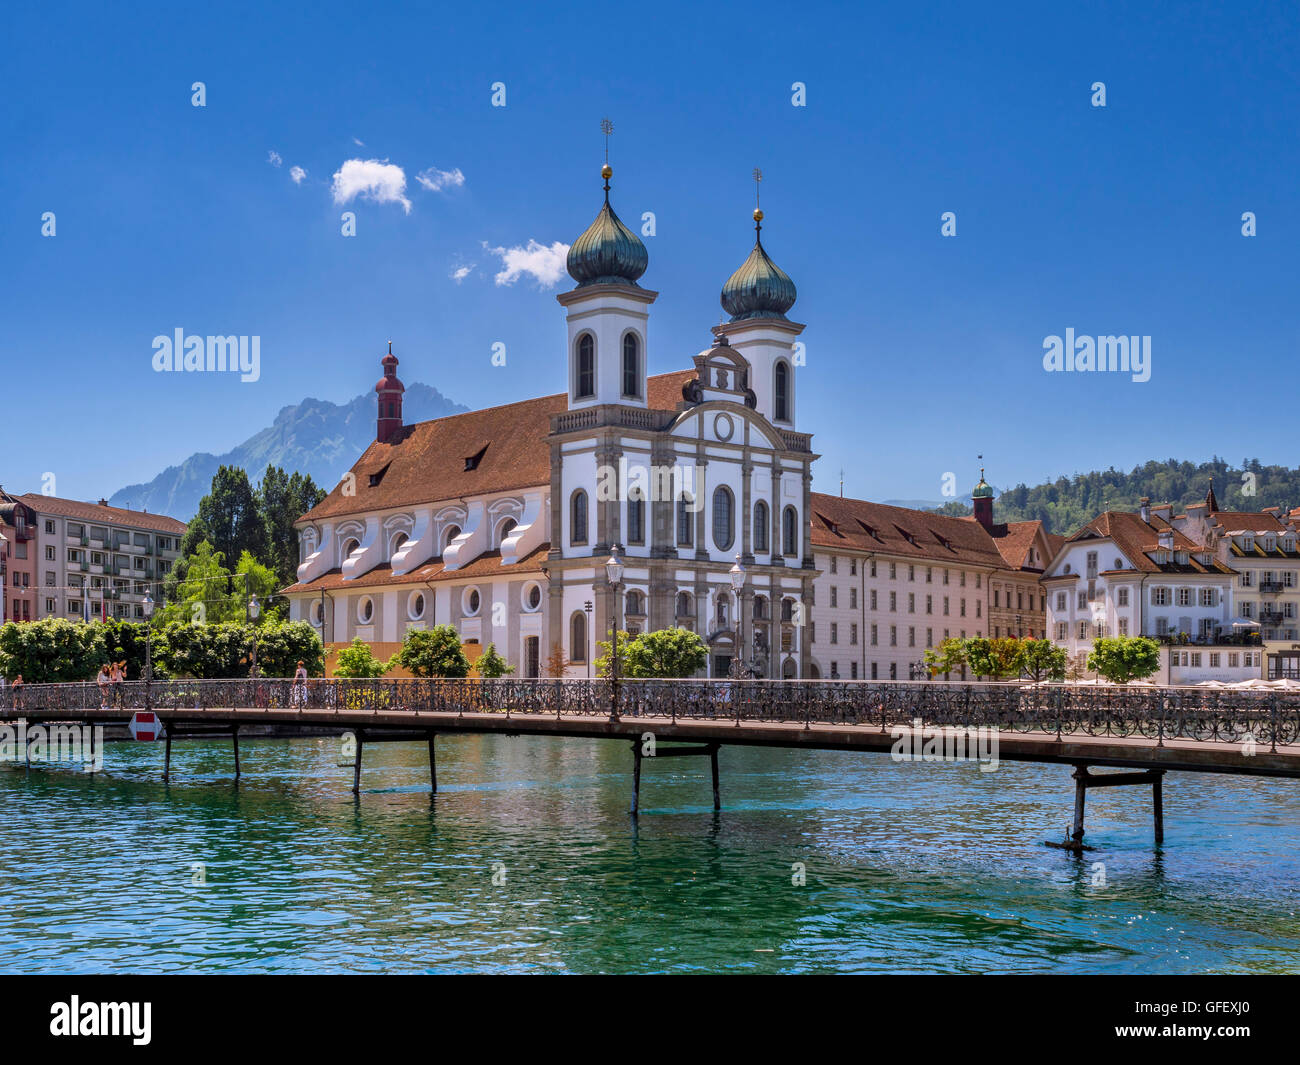 Old Town and Jesuit Church on the River Reuss in Lucerne, Switzerland, Europe Stock Photo